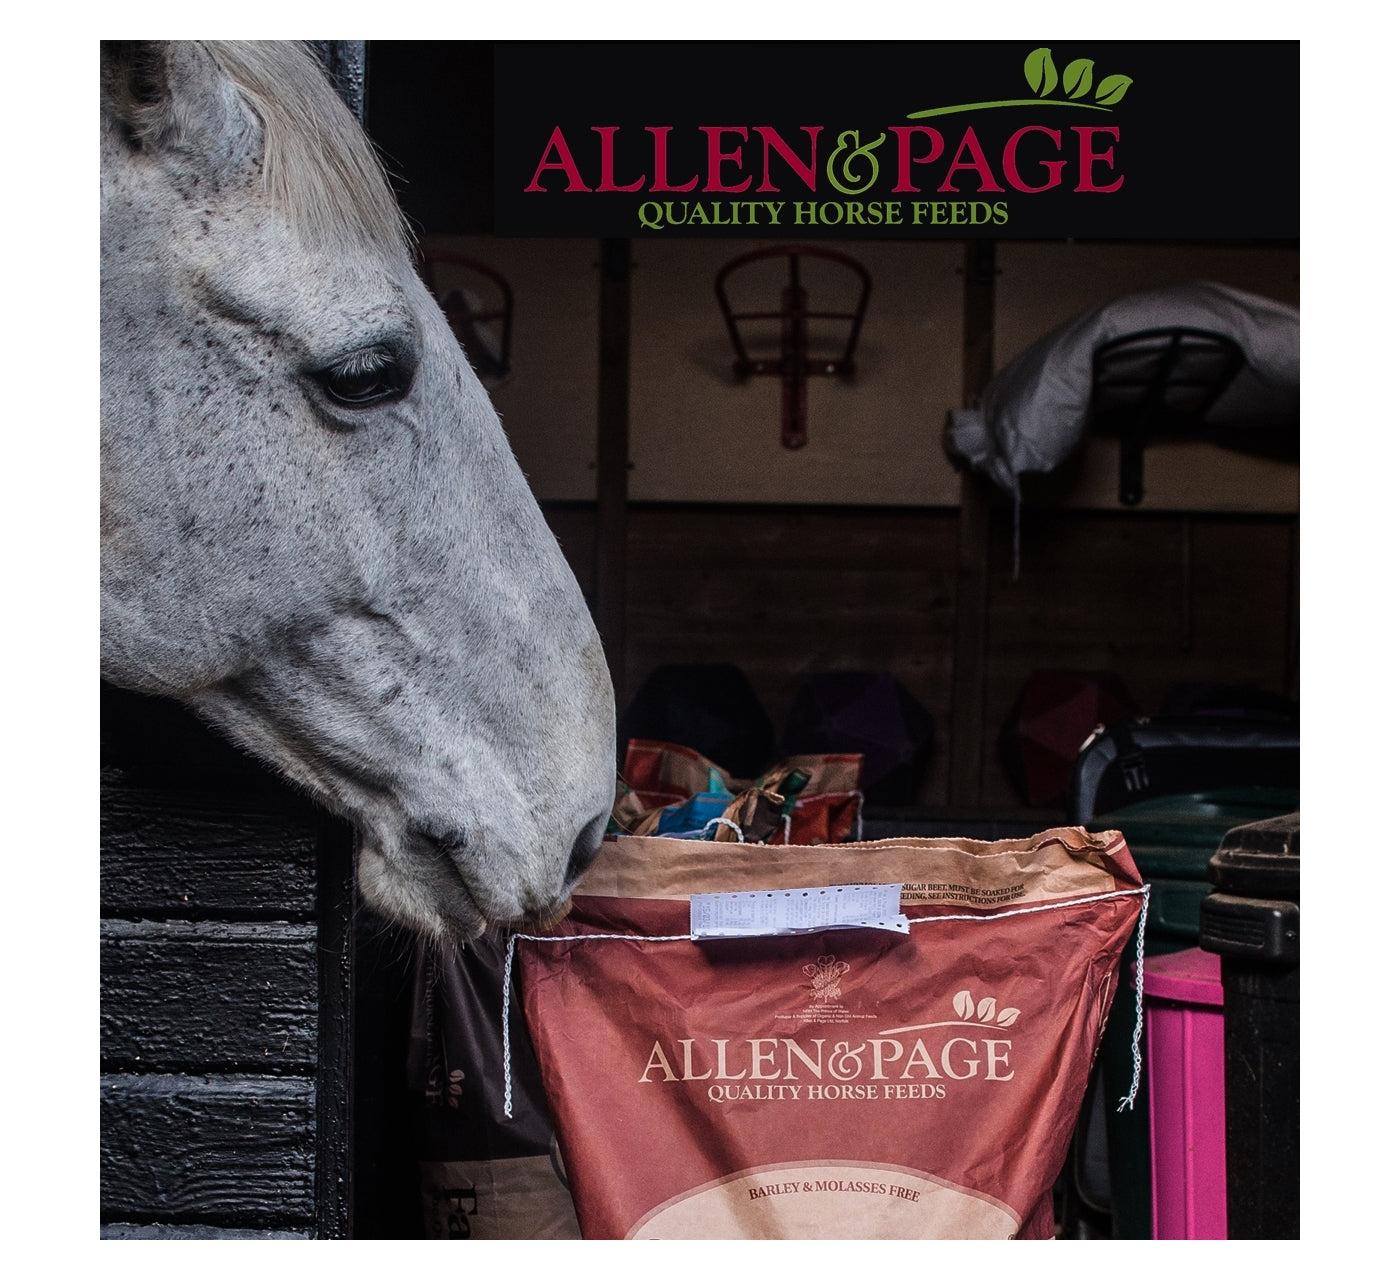 Allen & Page - Calm & Condition | Horse Feed - Buy Online SPR Centre UK